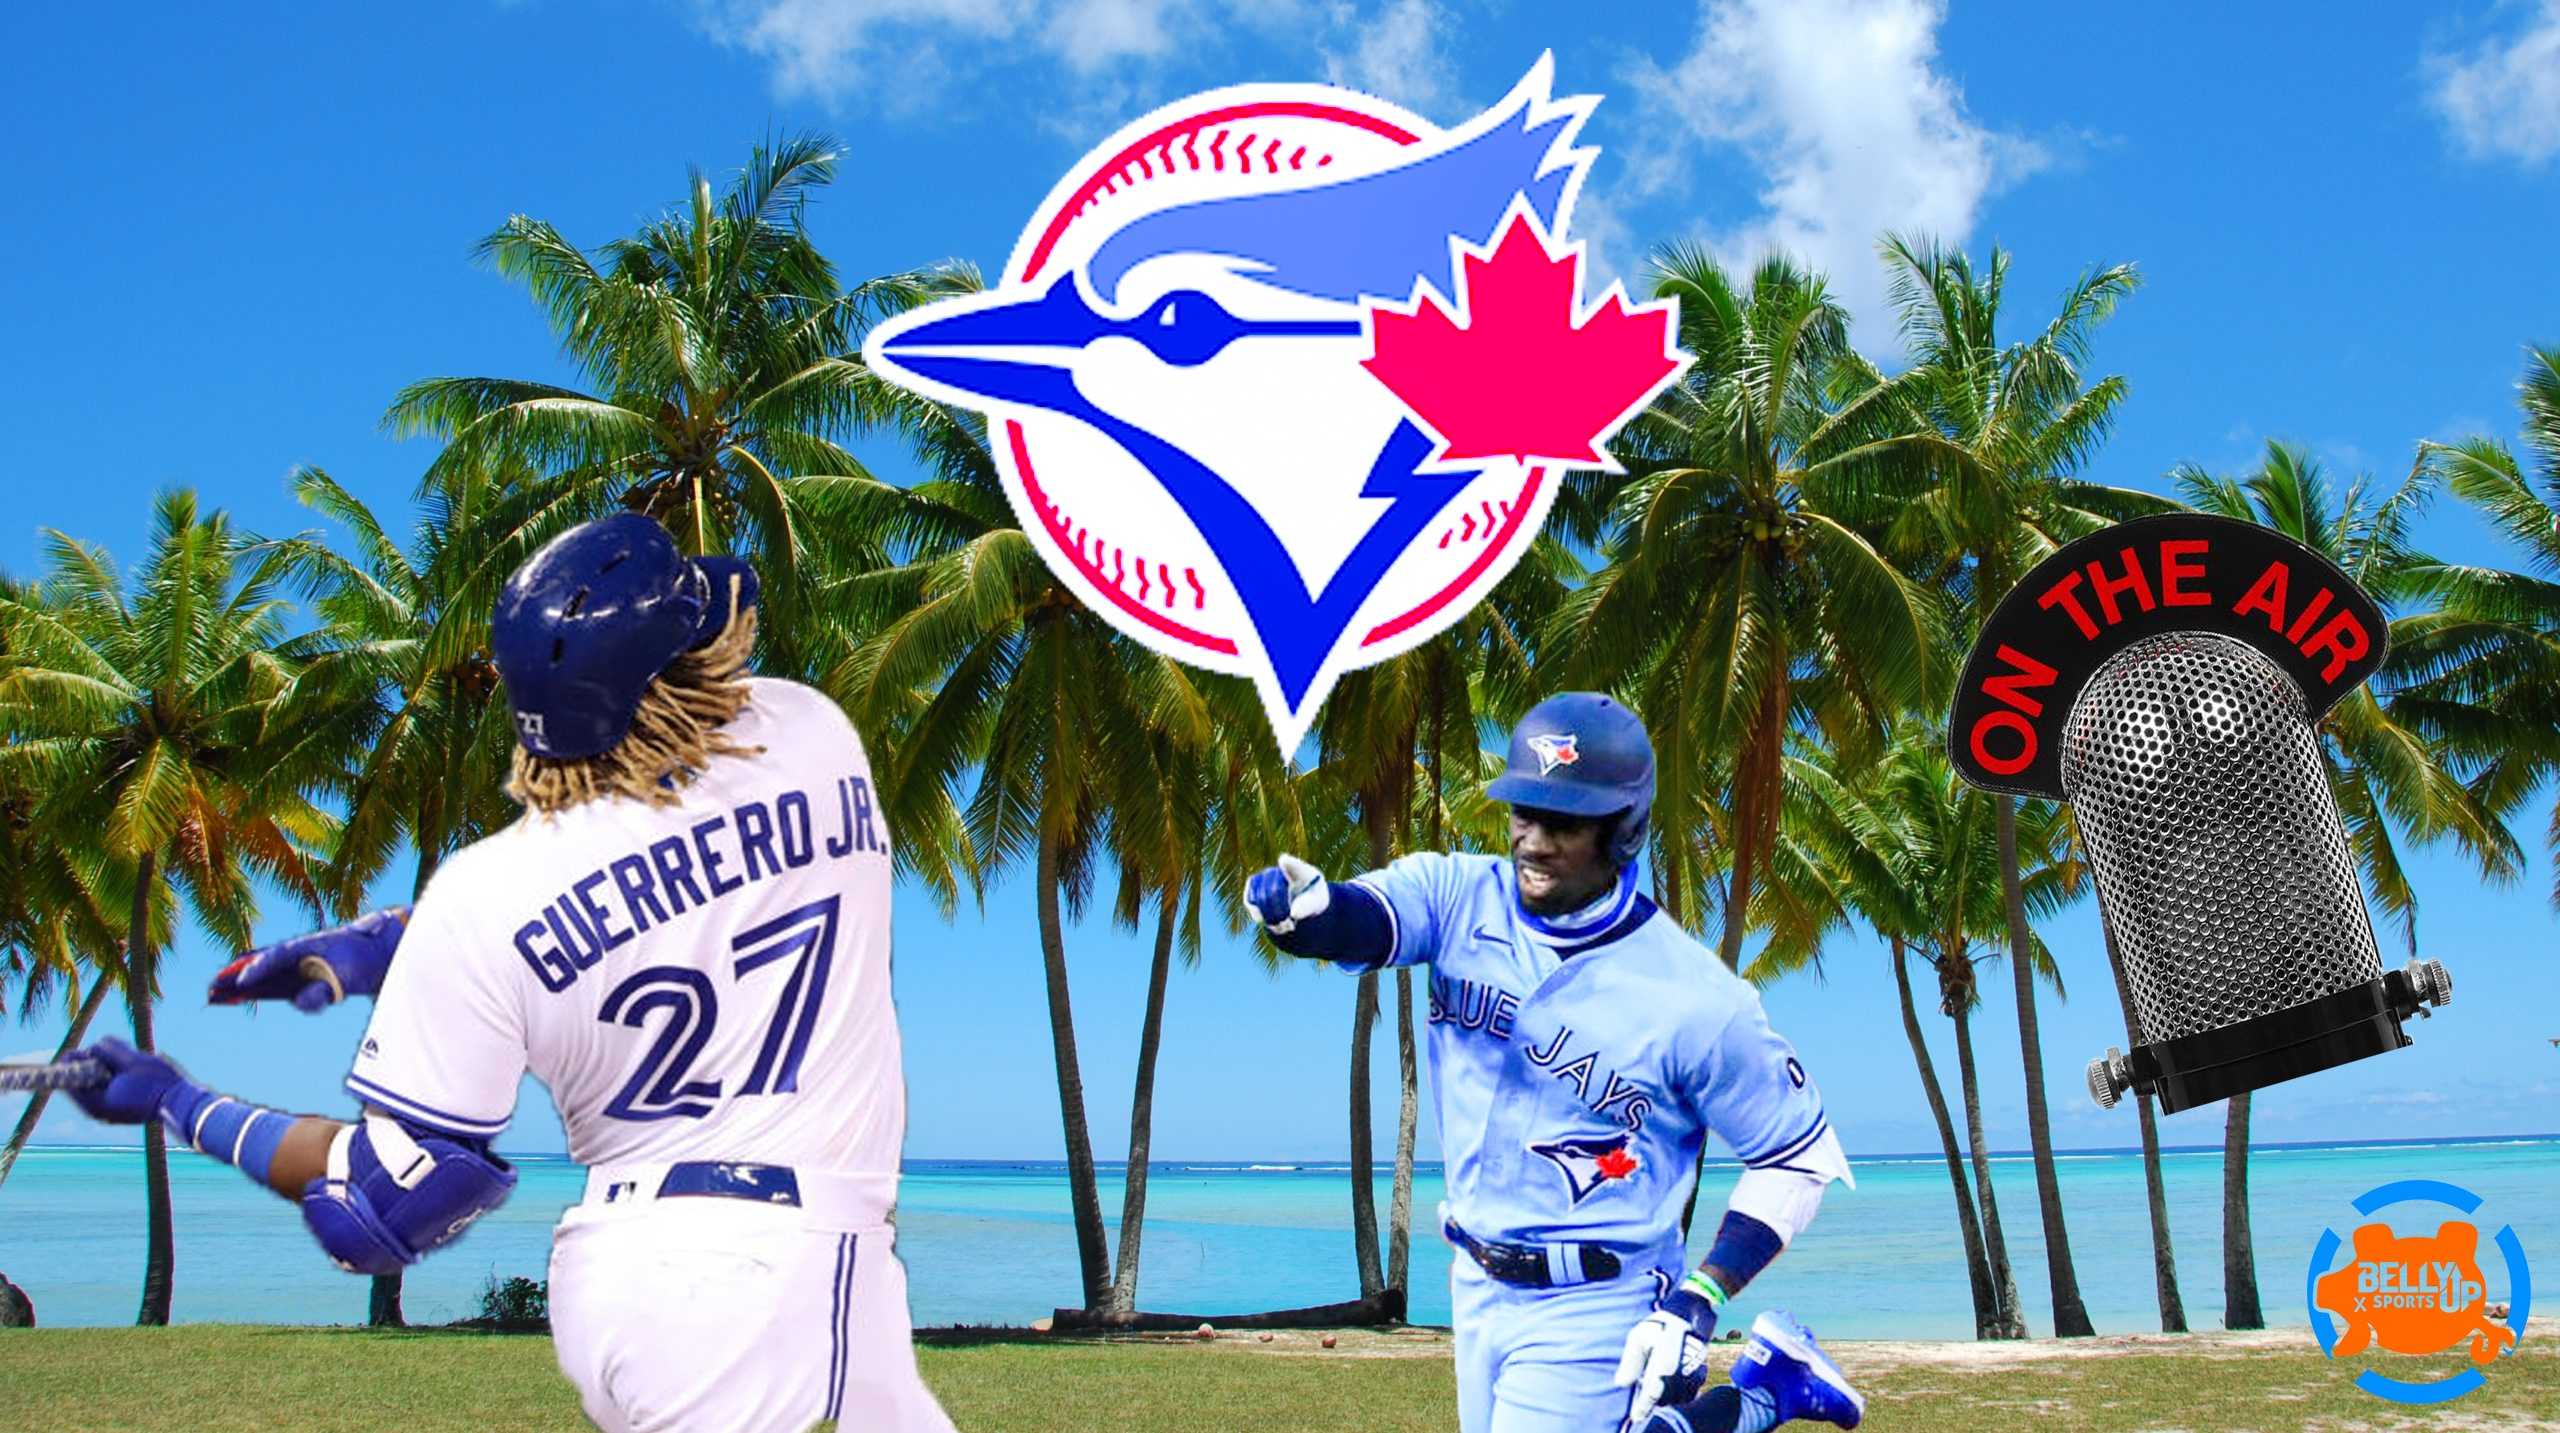  Birds in Flight: Early Impressions From Jays Camp